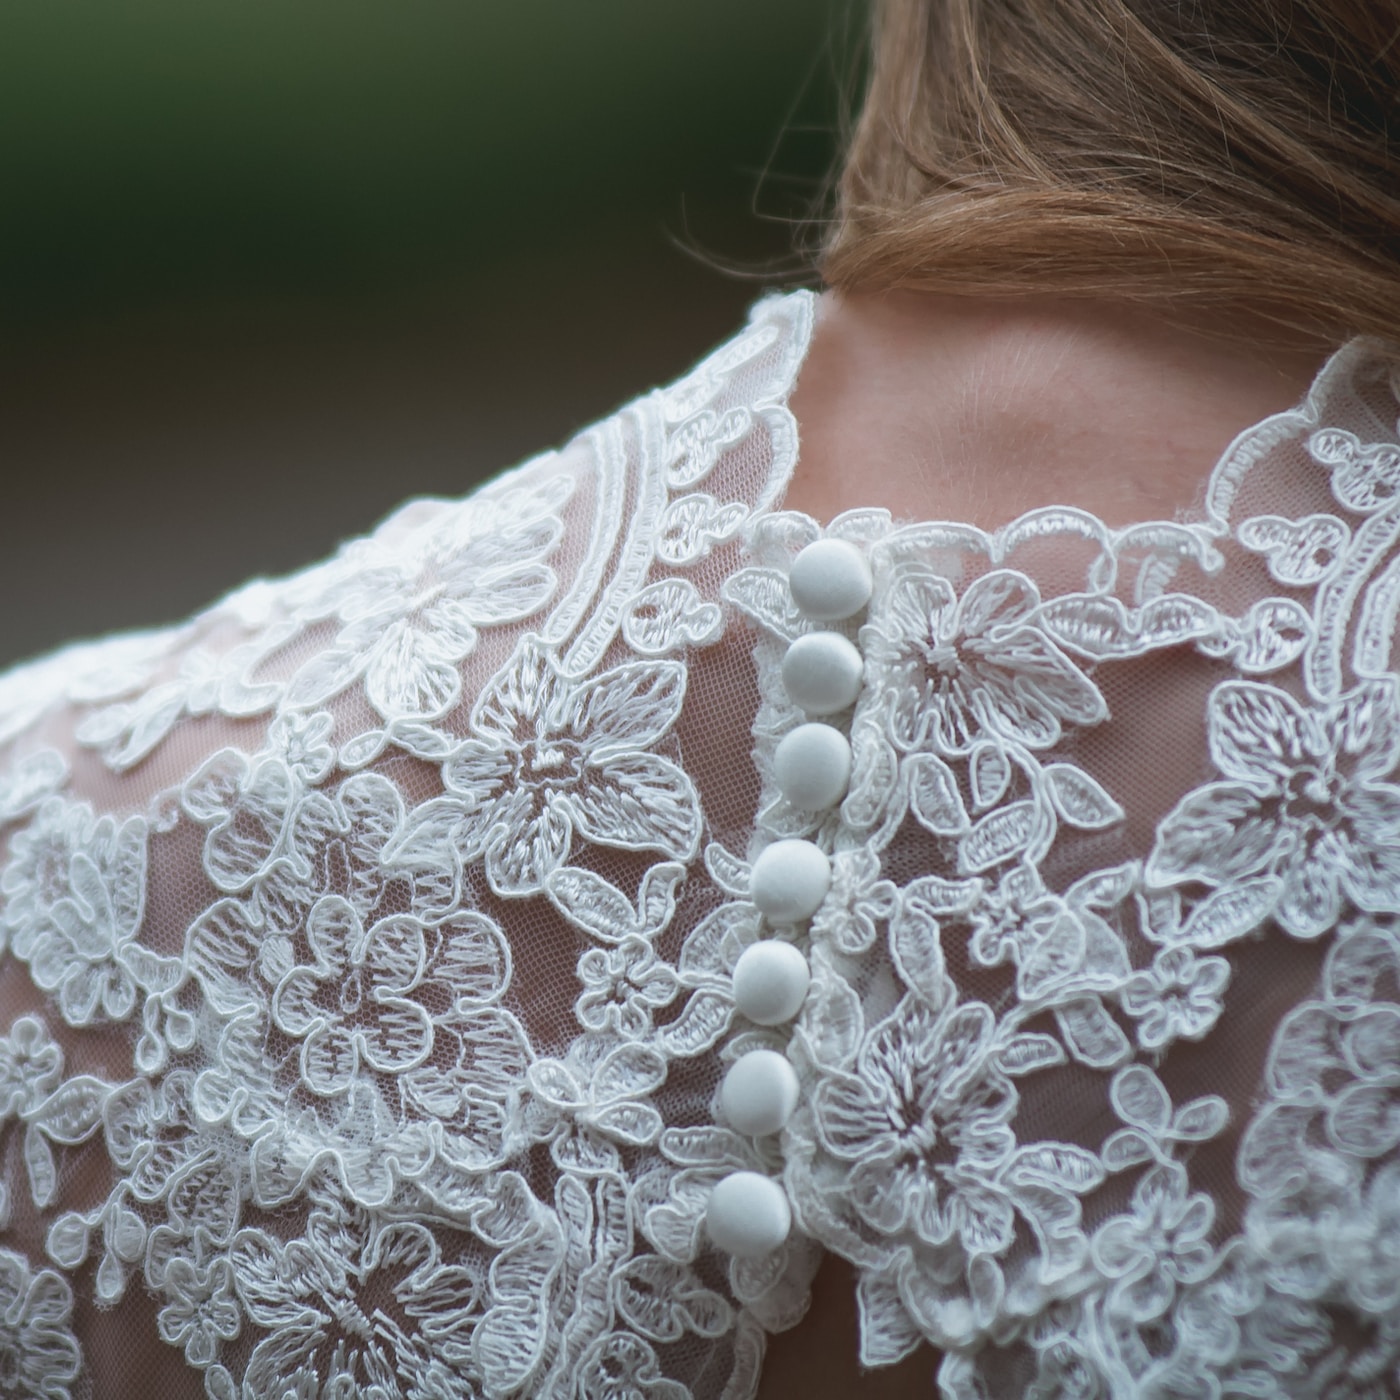 The Most Beautiful Ways for Ladies to Wear Lace ...